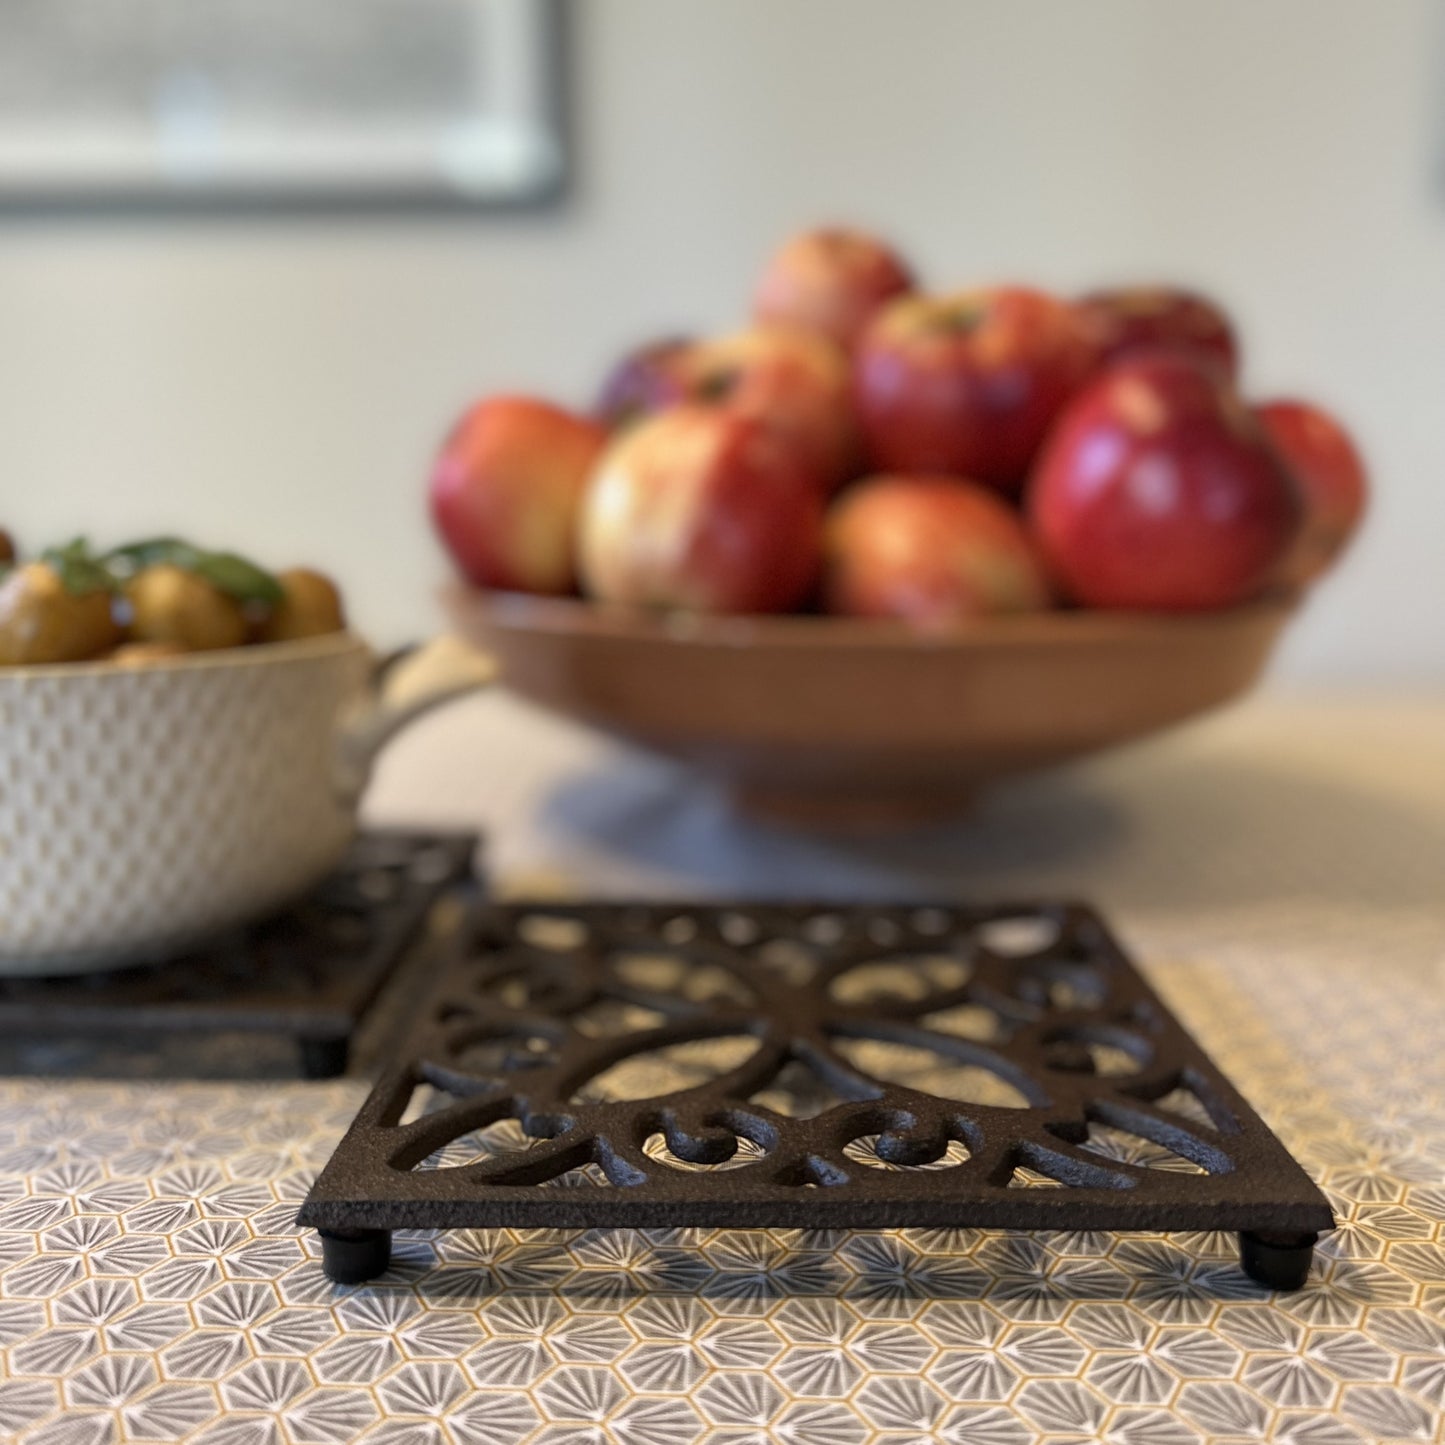 Cast Iron Square Table Trivet (Pack of 2)